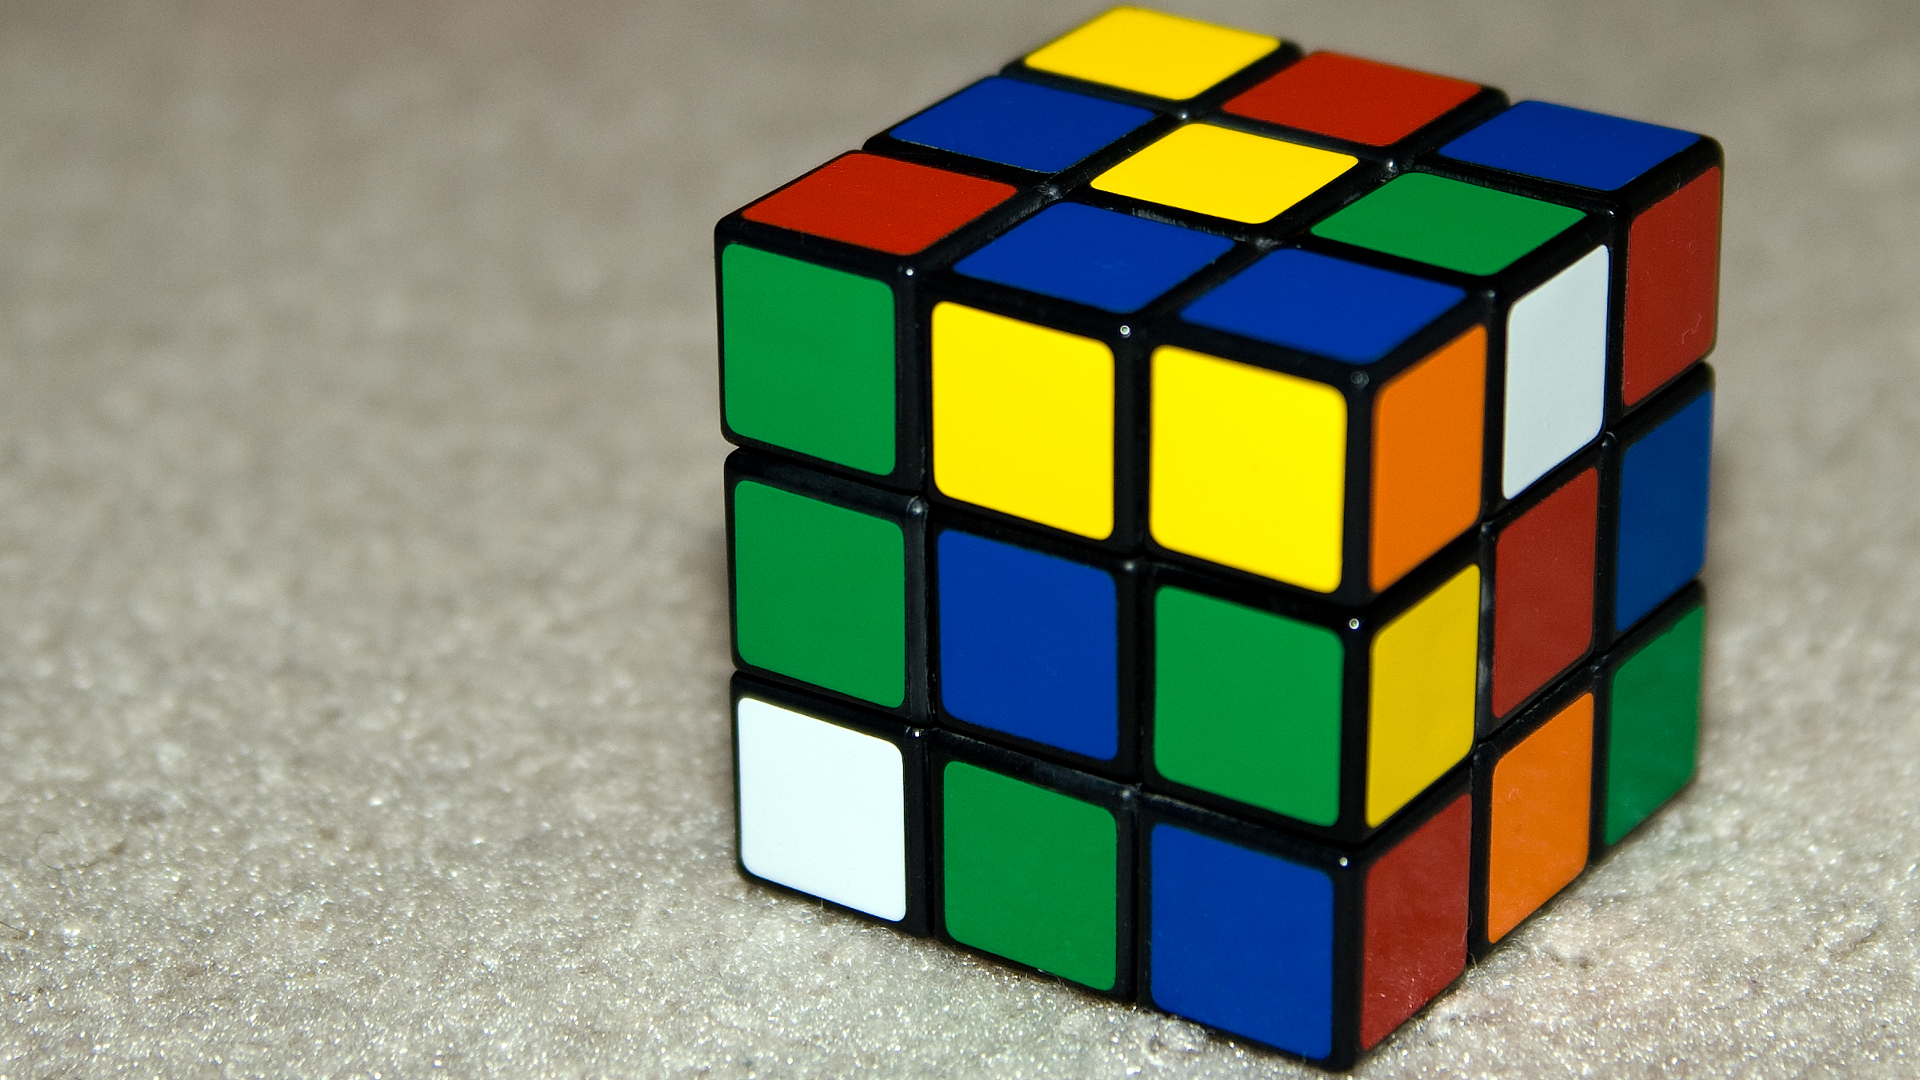 cubes Rubiks Cube wallpaper background 1920x1080